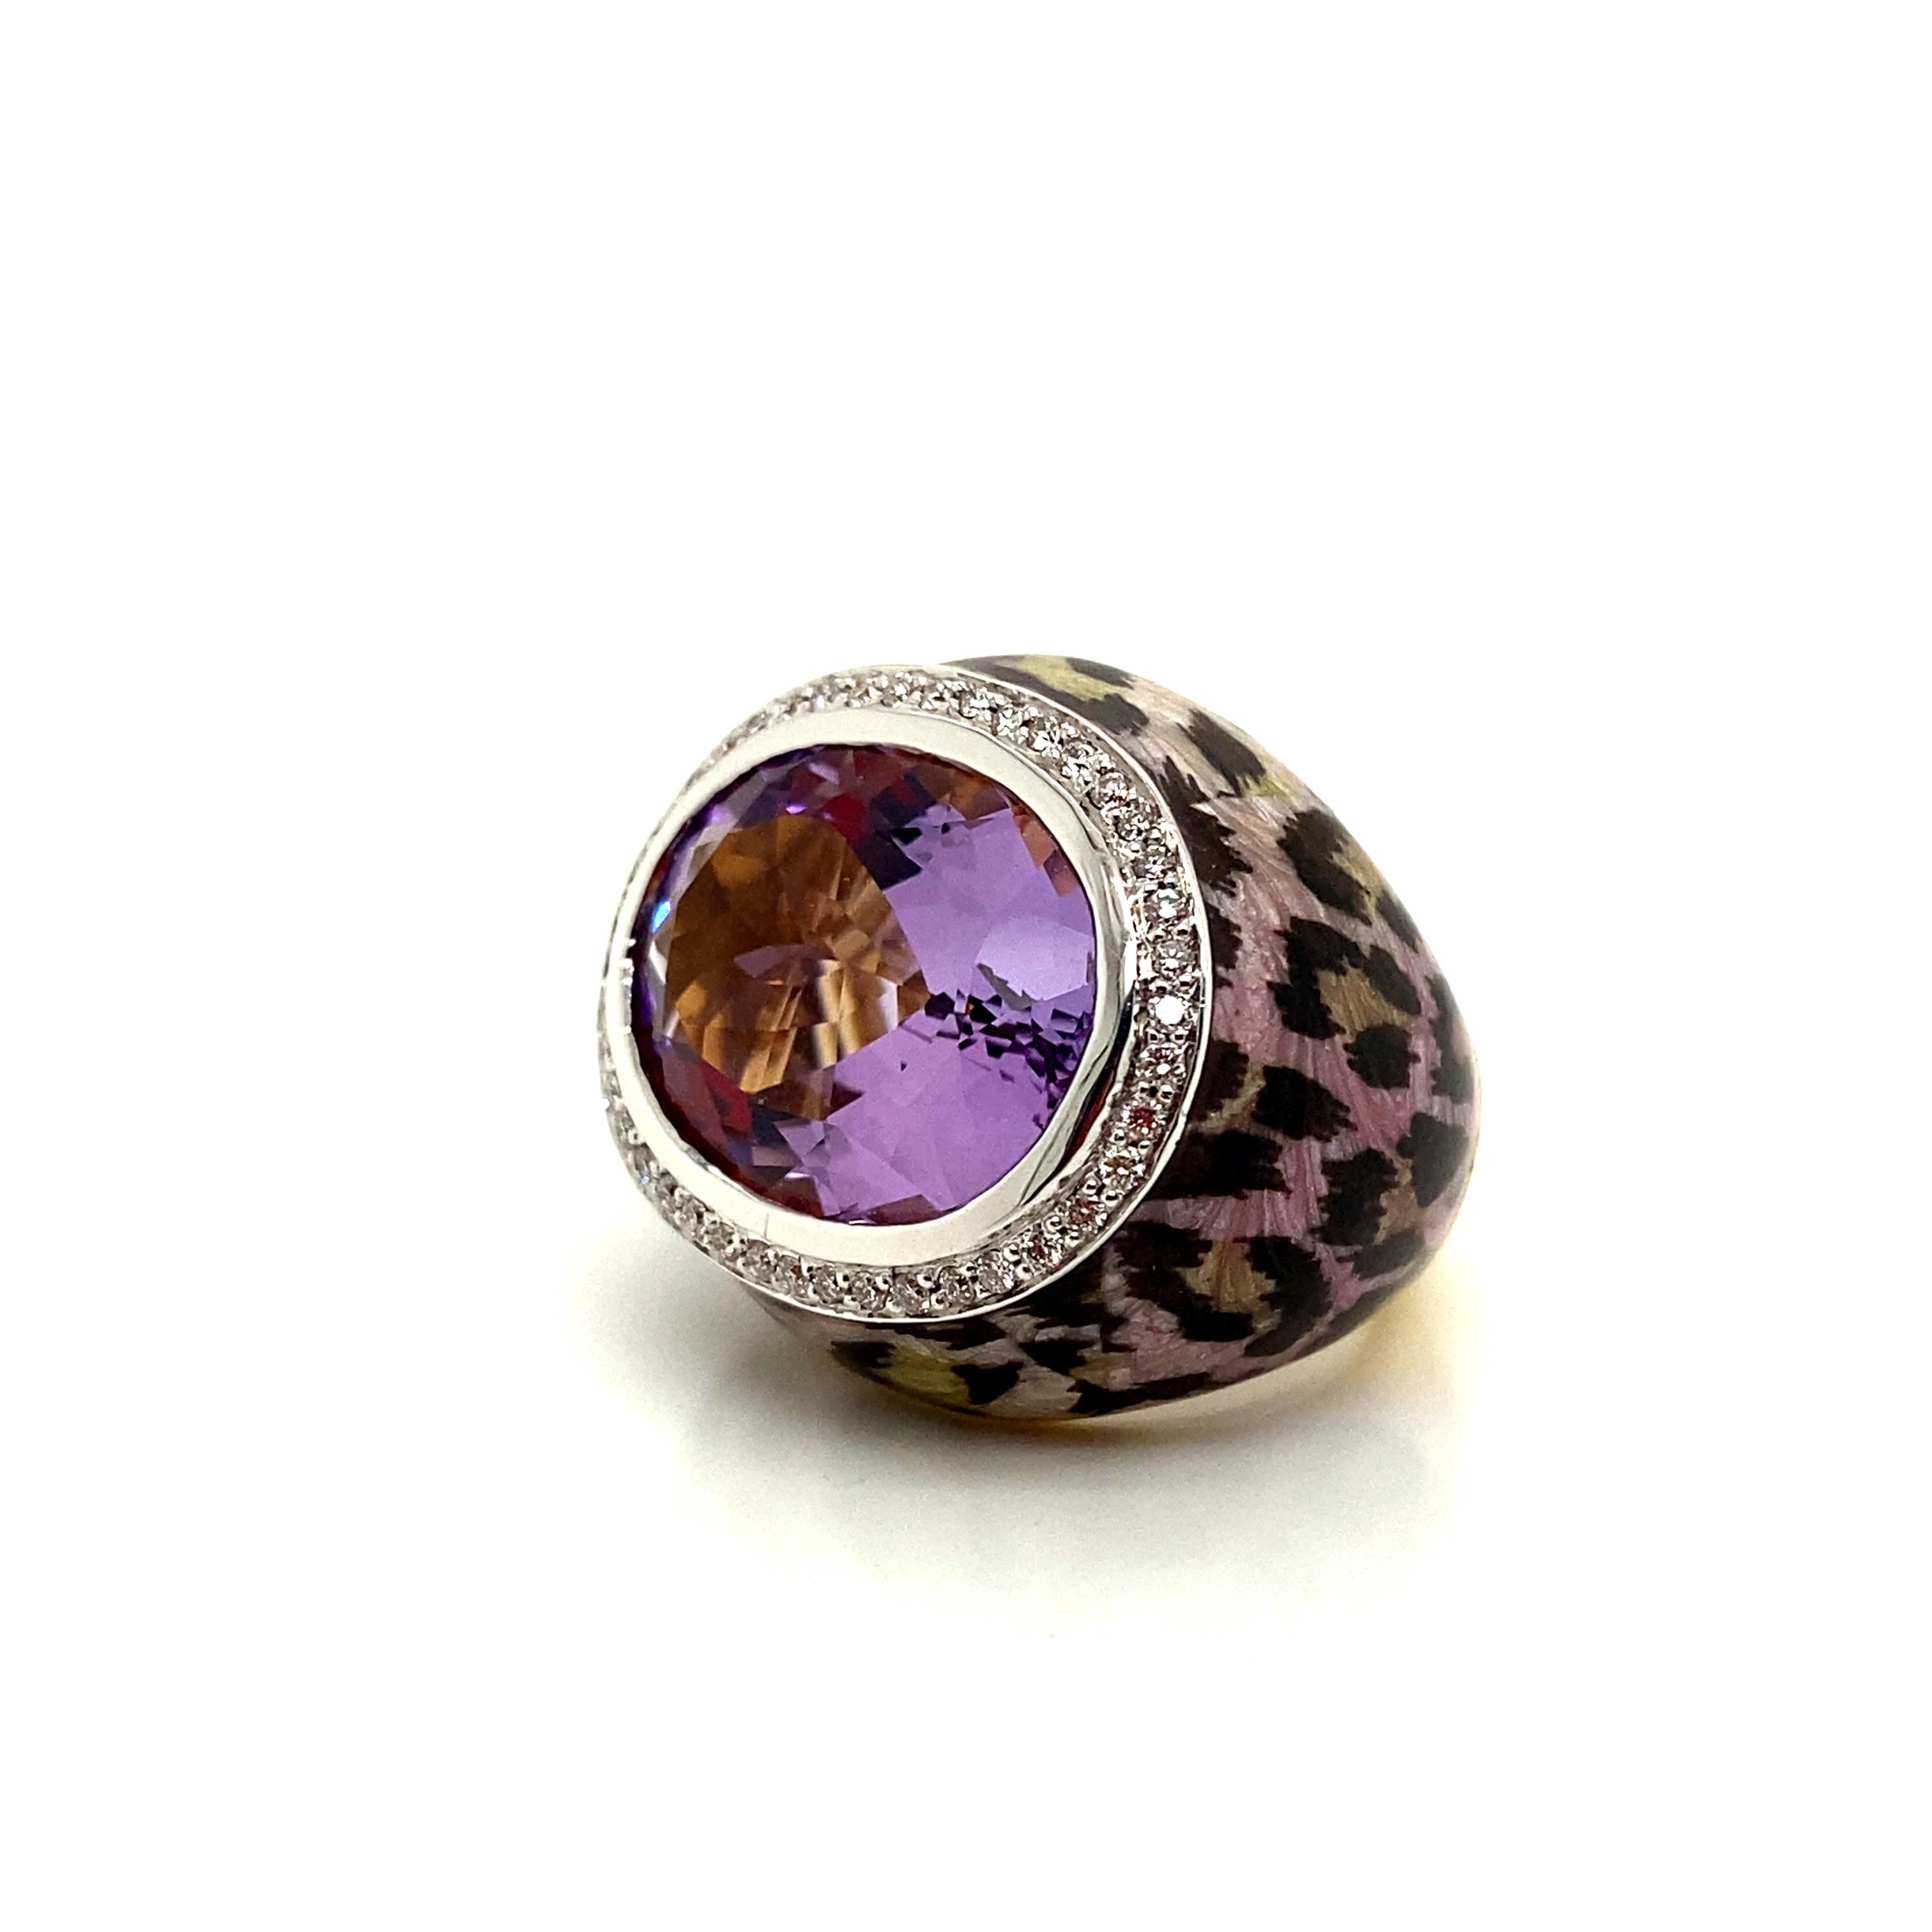 14 Carat Natural Oval-Cut Amethyst and White Diamond Yellow Gold Cocktail Ring:

A unique ring, it features a natural oval-cut amethyst bezel set in the centre weighing 14 carat surrounded by a halo of white round brilliant-cut diamonds weighing